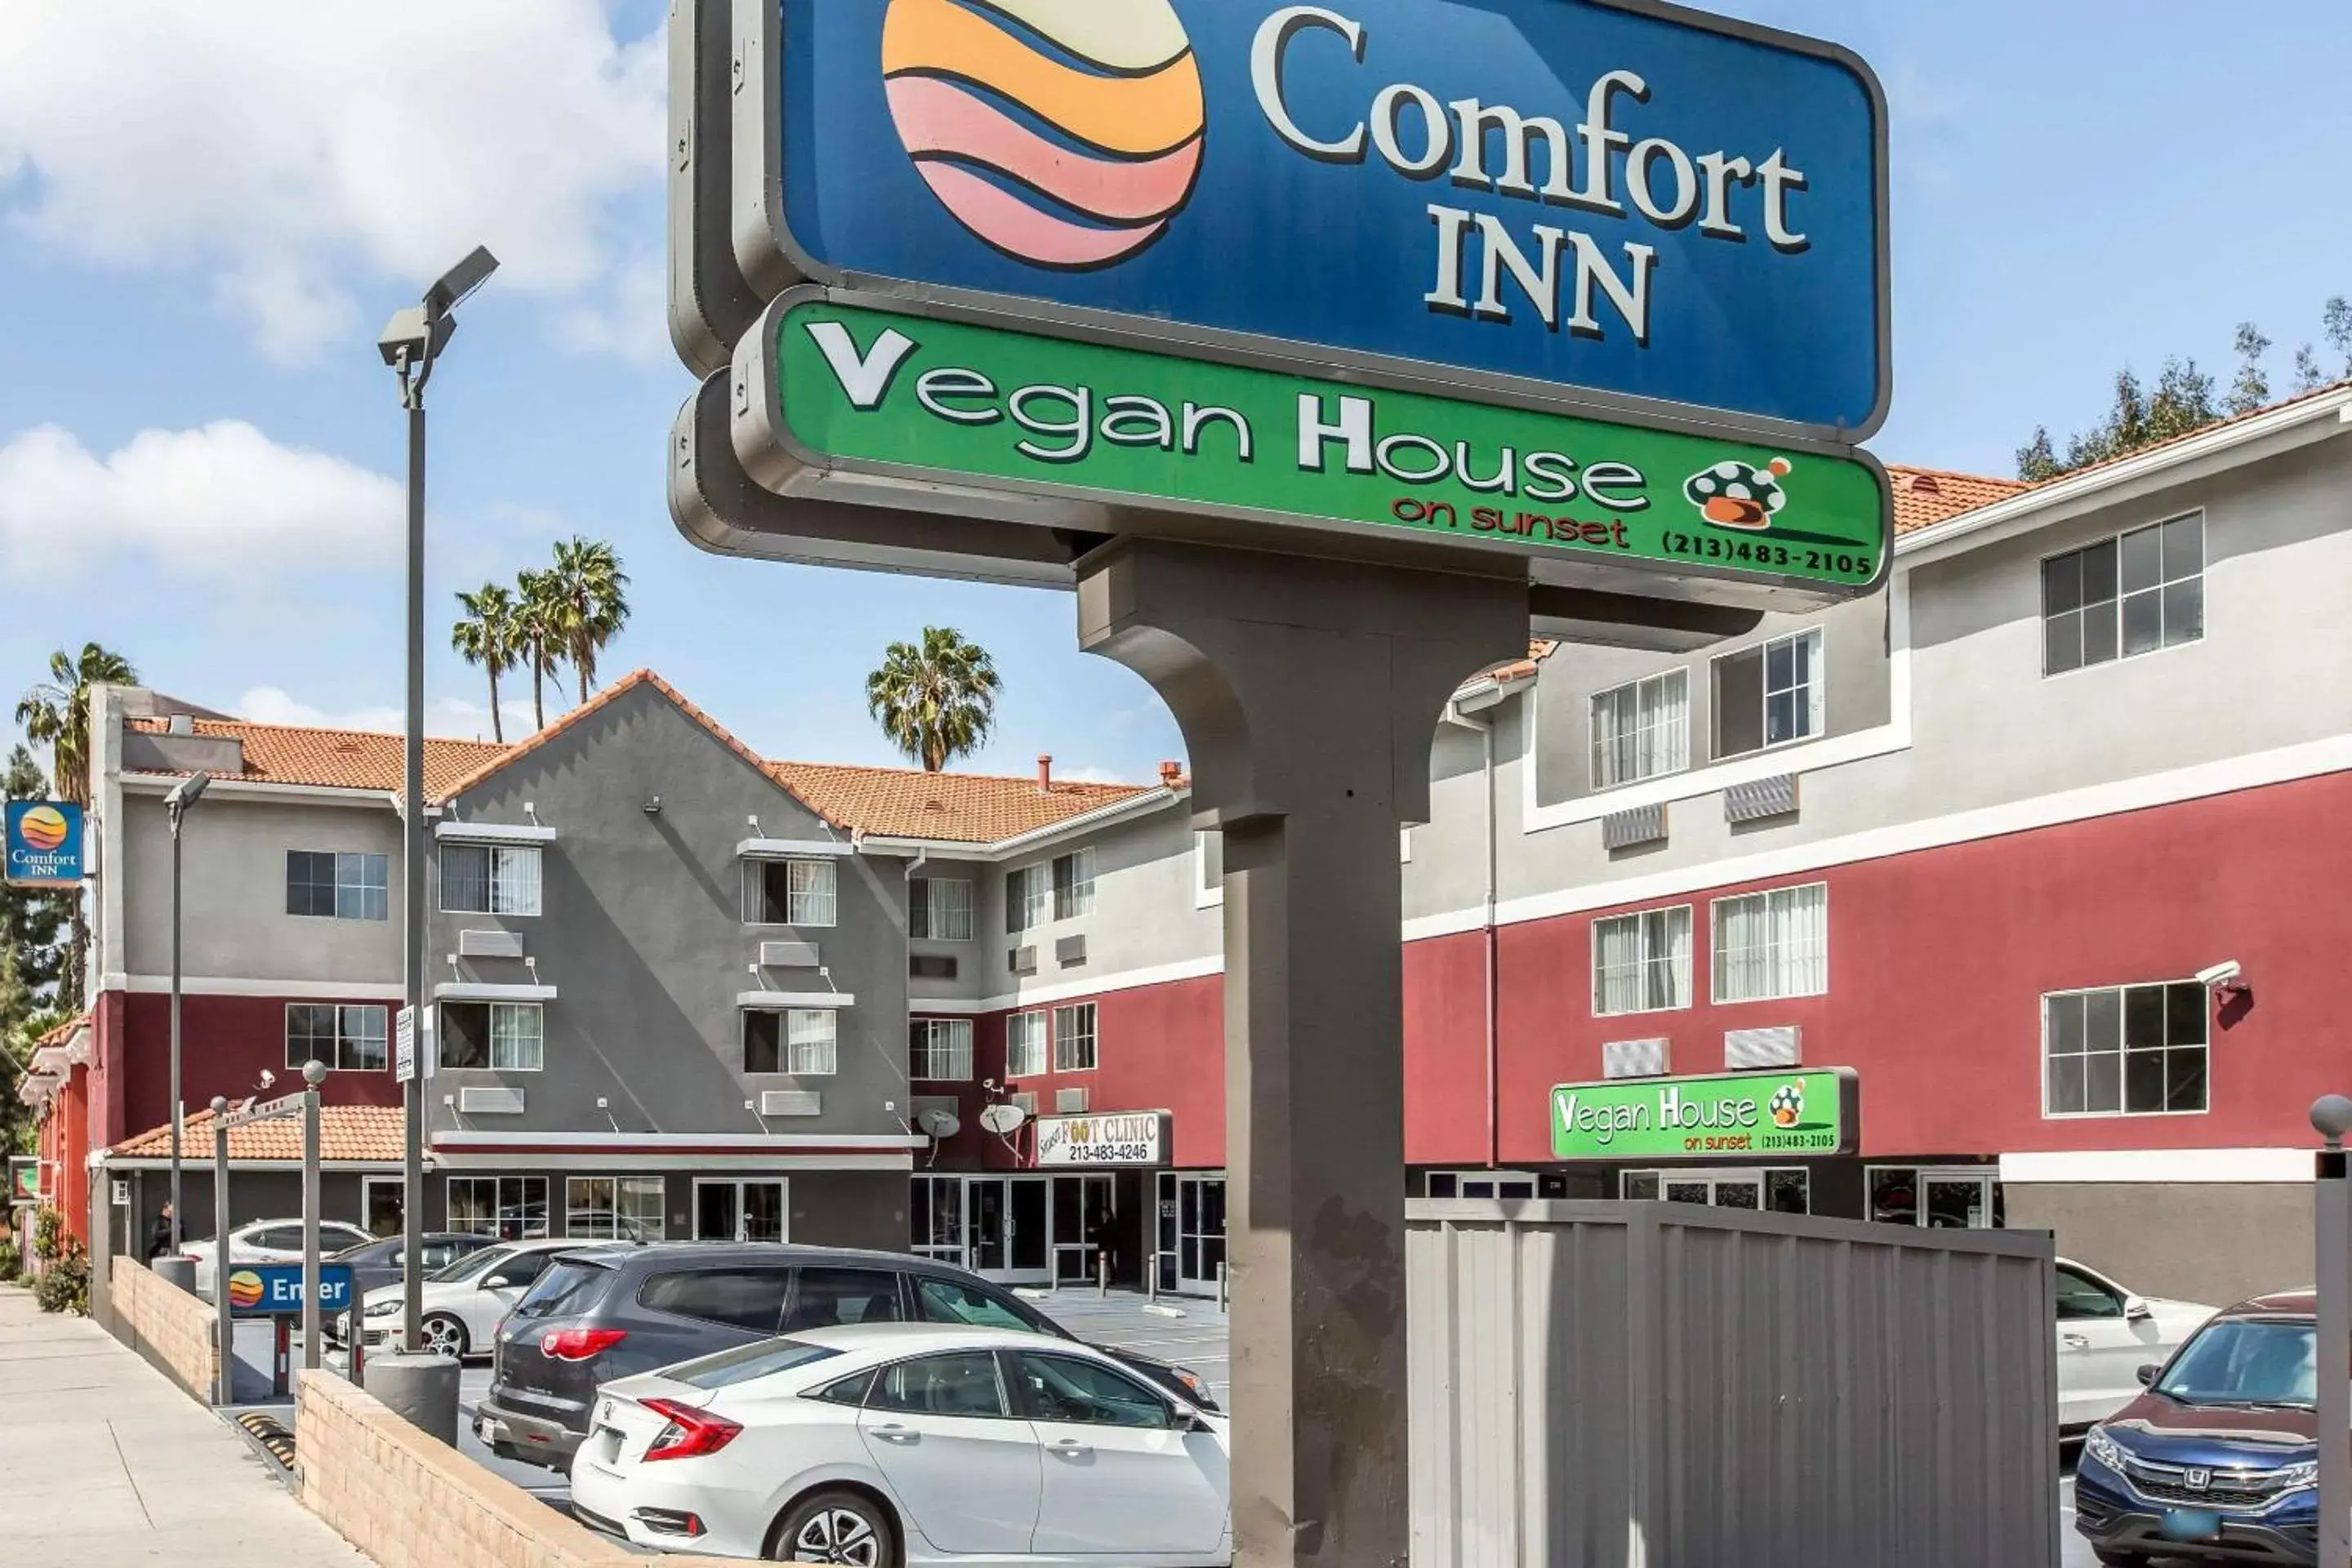 Property Building in Comfort Inn Los Angeles near Hollywood